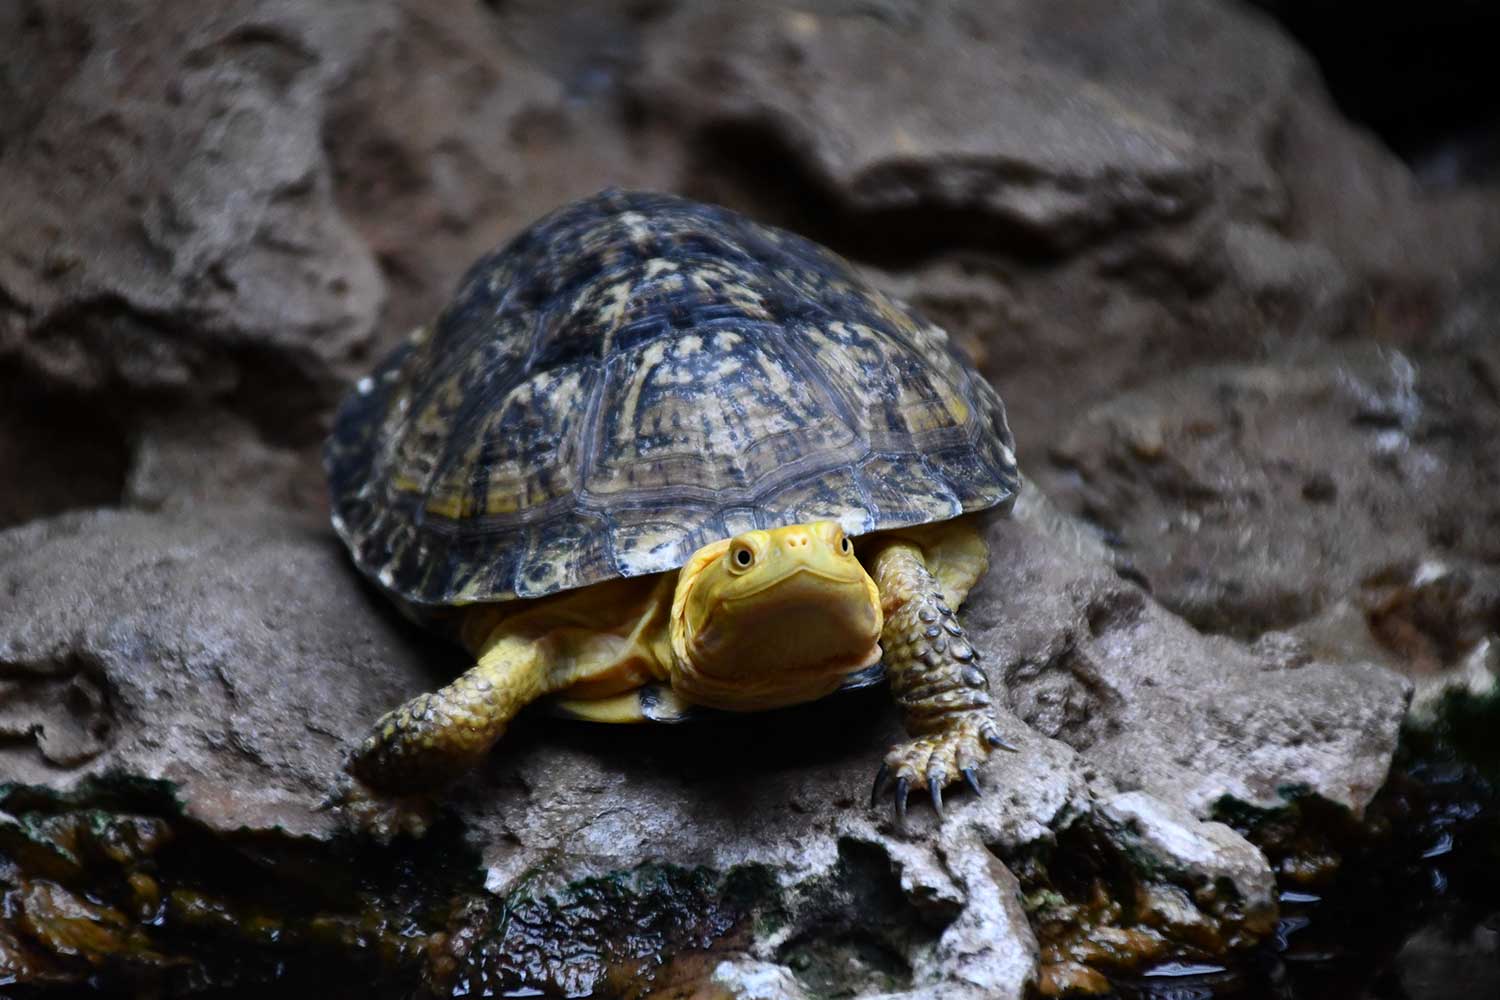 A Blanding's turtle on a rock in its enclosure.